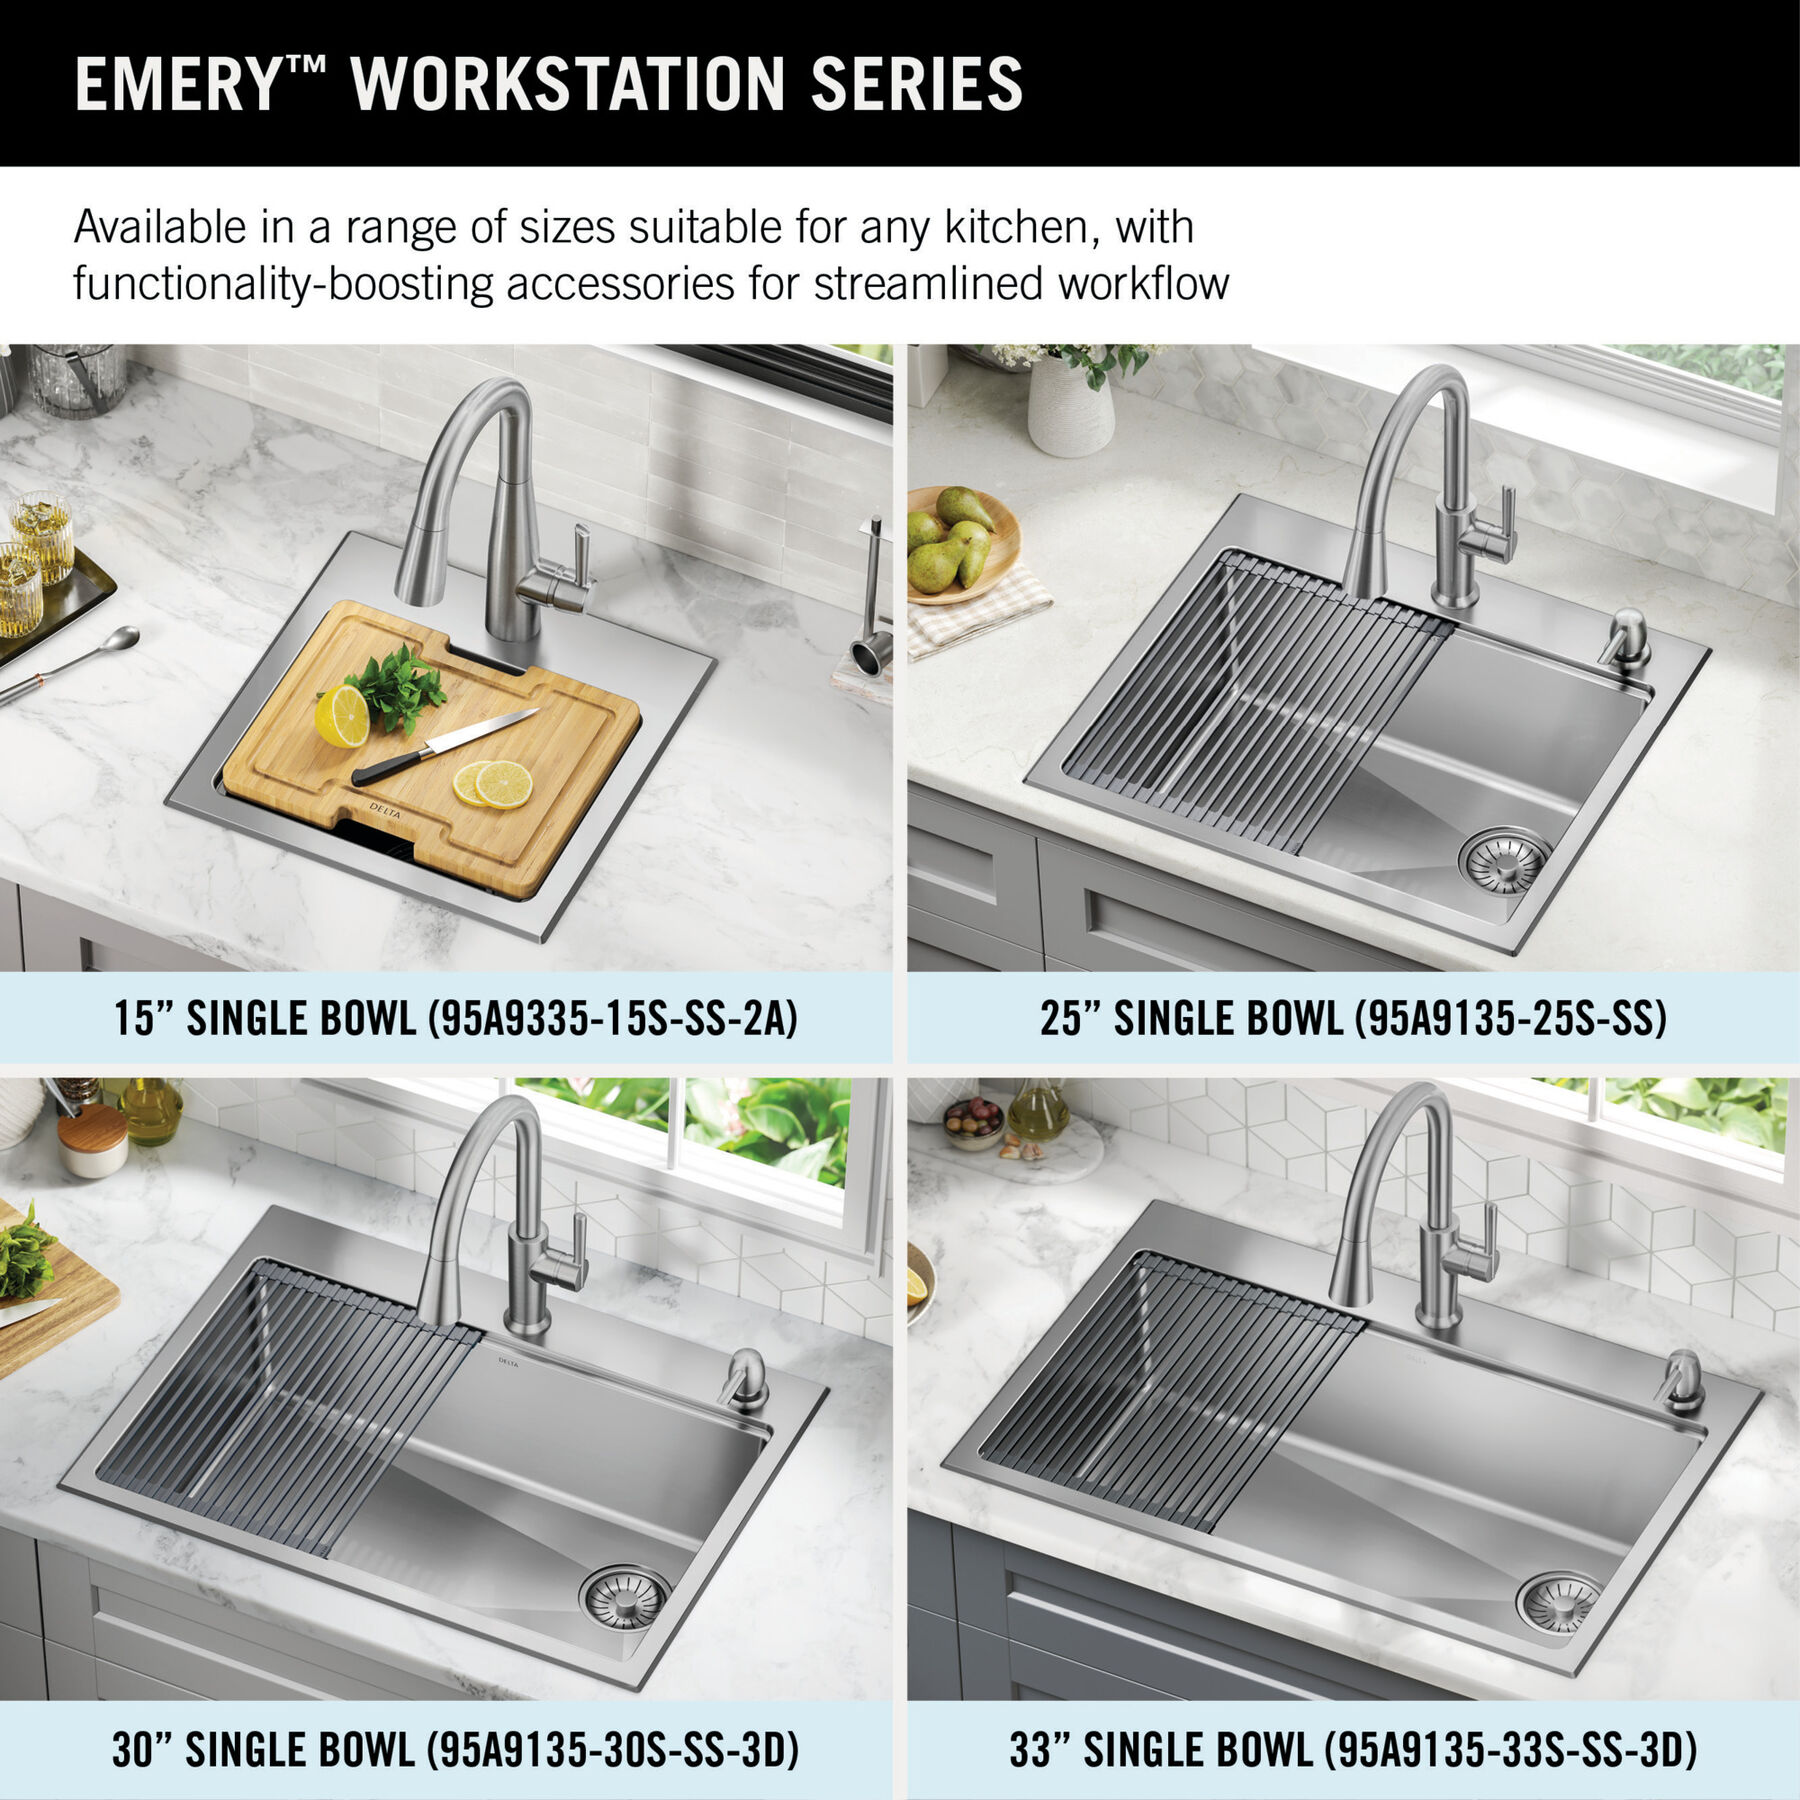 25” Stainless Steel Workstation Kitchen Sink Drop-In Undermount Single Bowl  with WorkFlow™ Ledge and Accessories in Stainless Steel 95A9135-25S-SS-3D